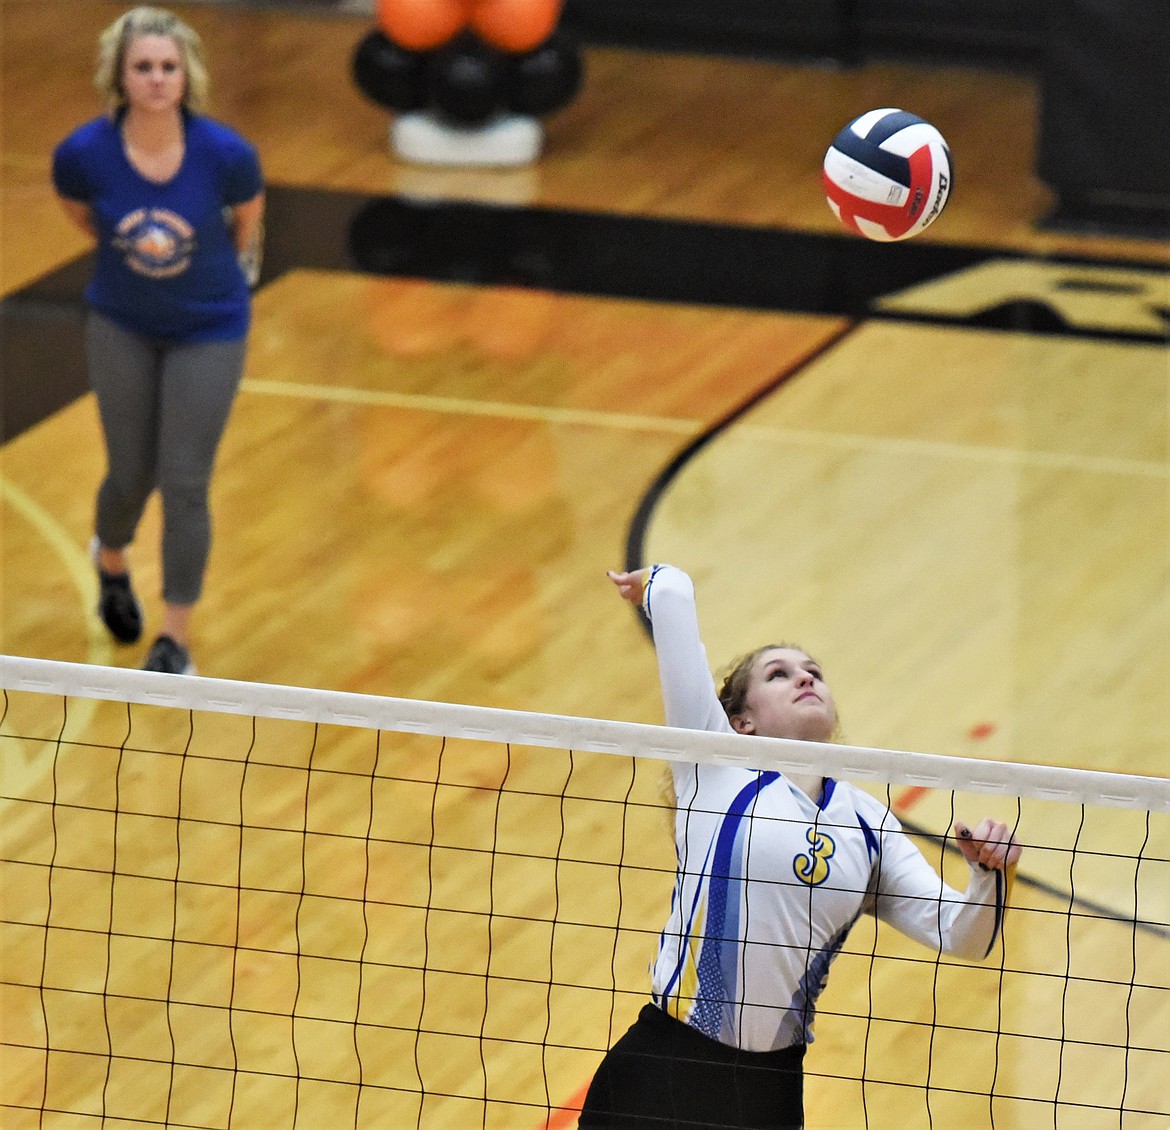 Ember Rode looks to return a ball during an Oct. 28 game against Ronan. (Scot Heisel/Lake County Leader)